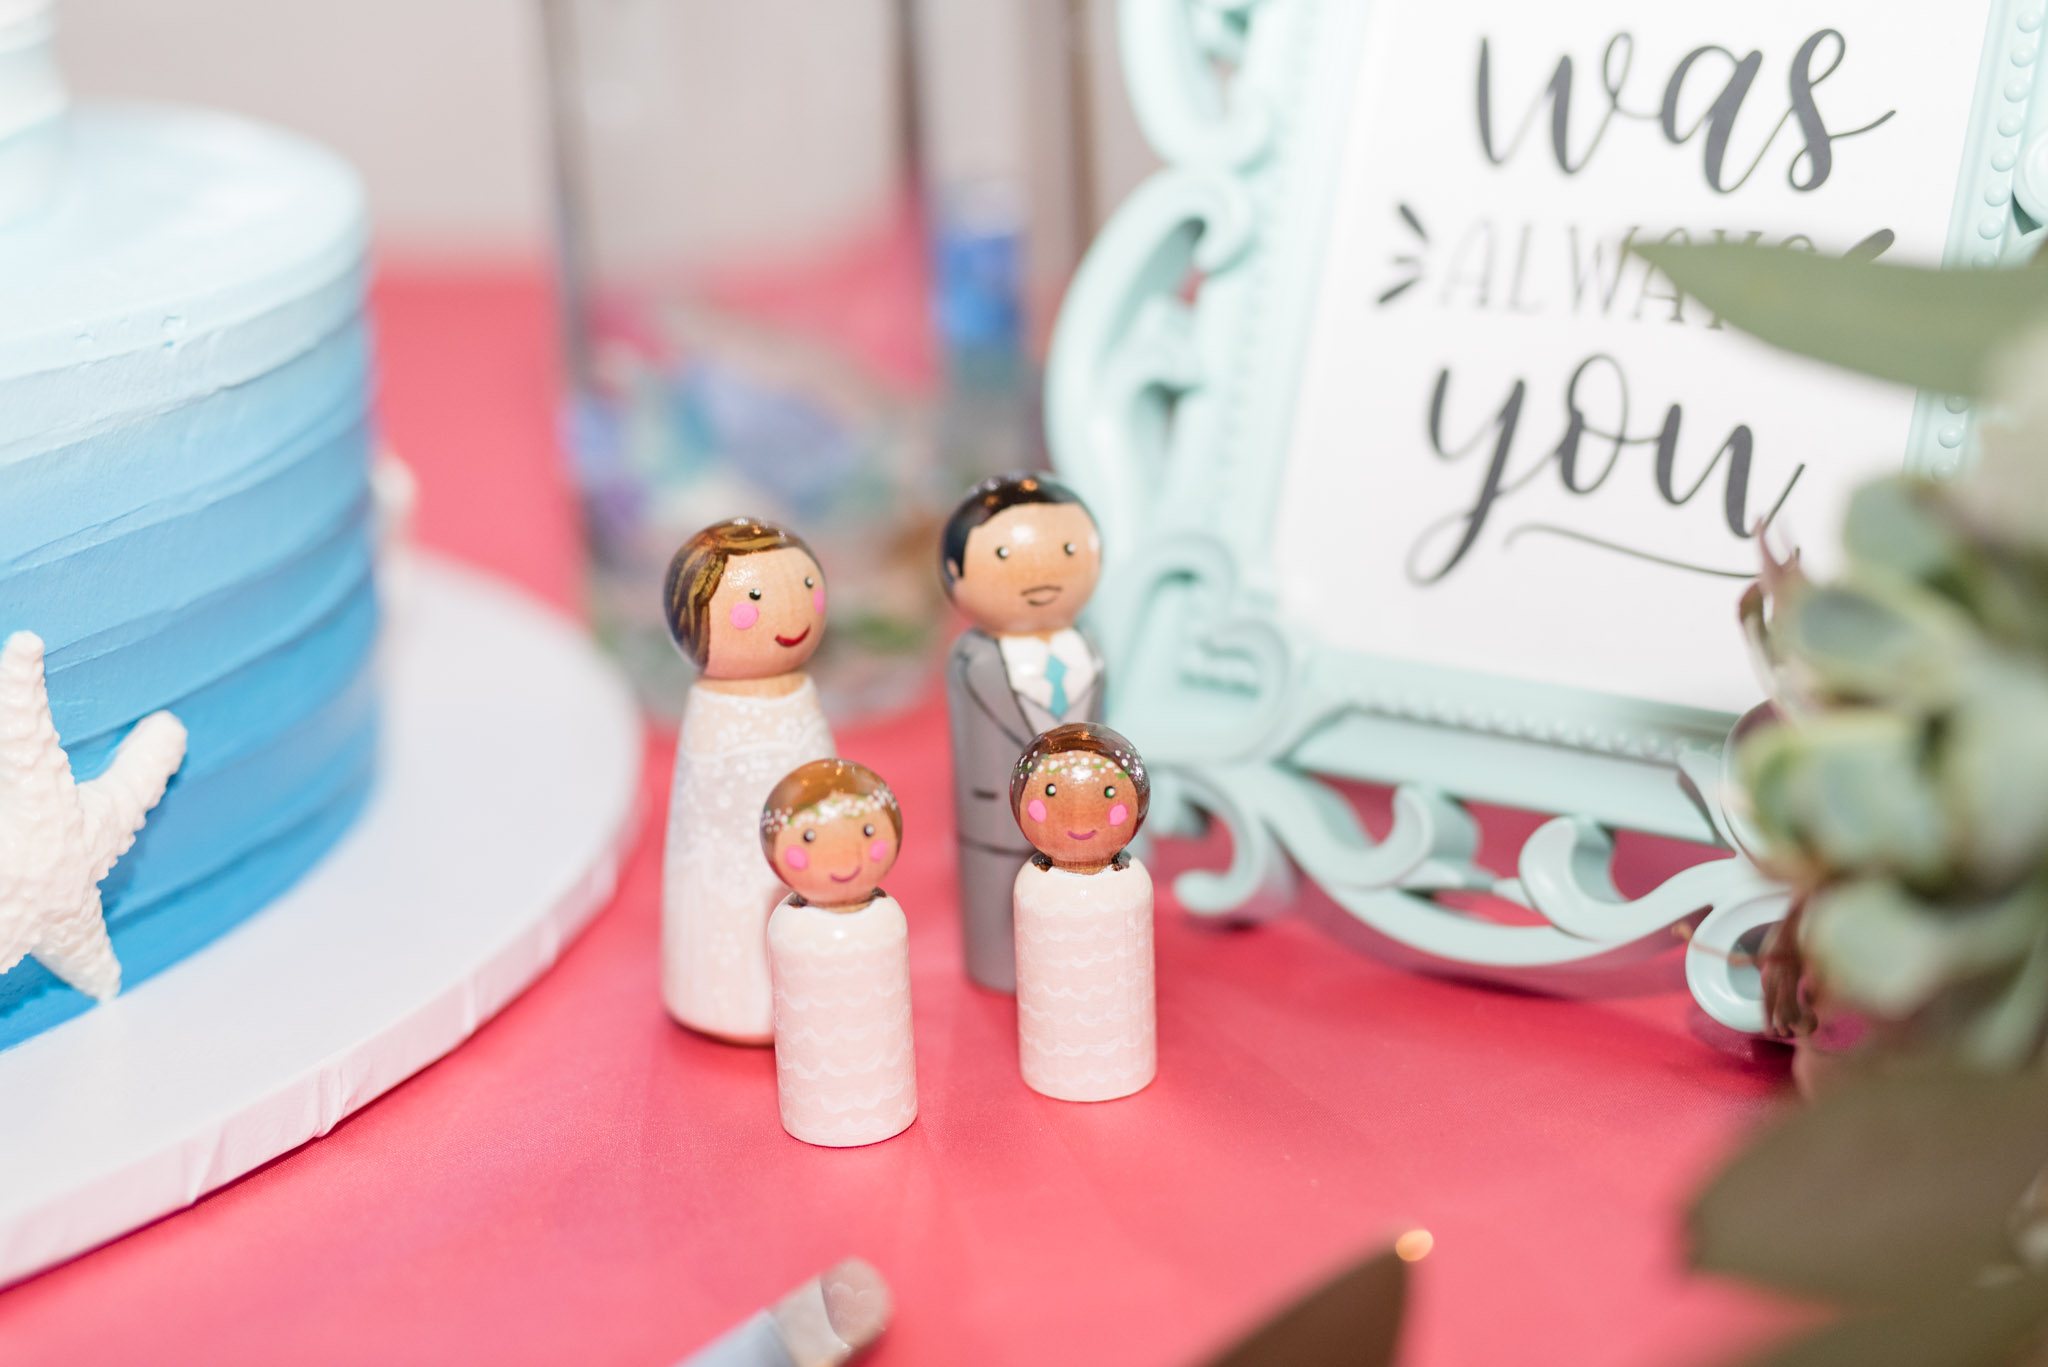 Bride and groom hand painted cake toppers.